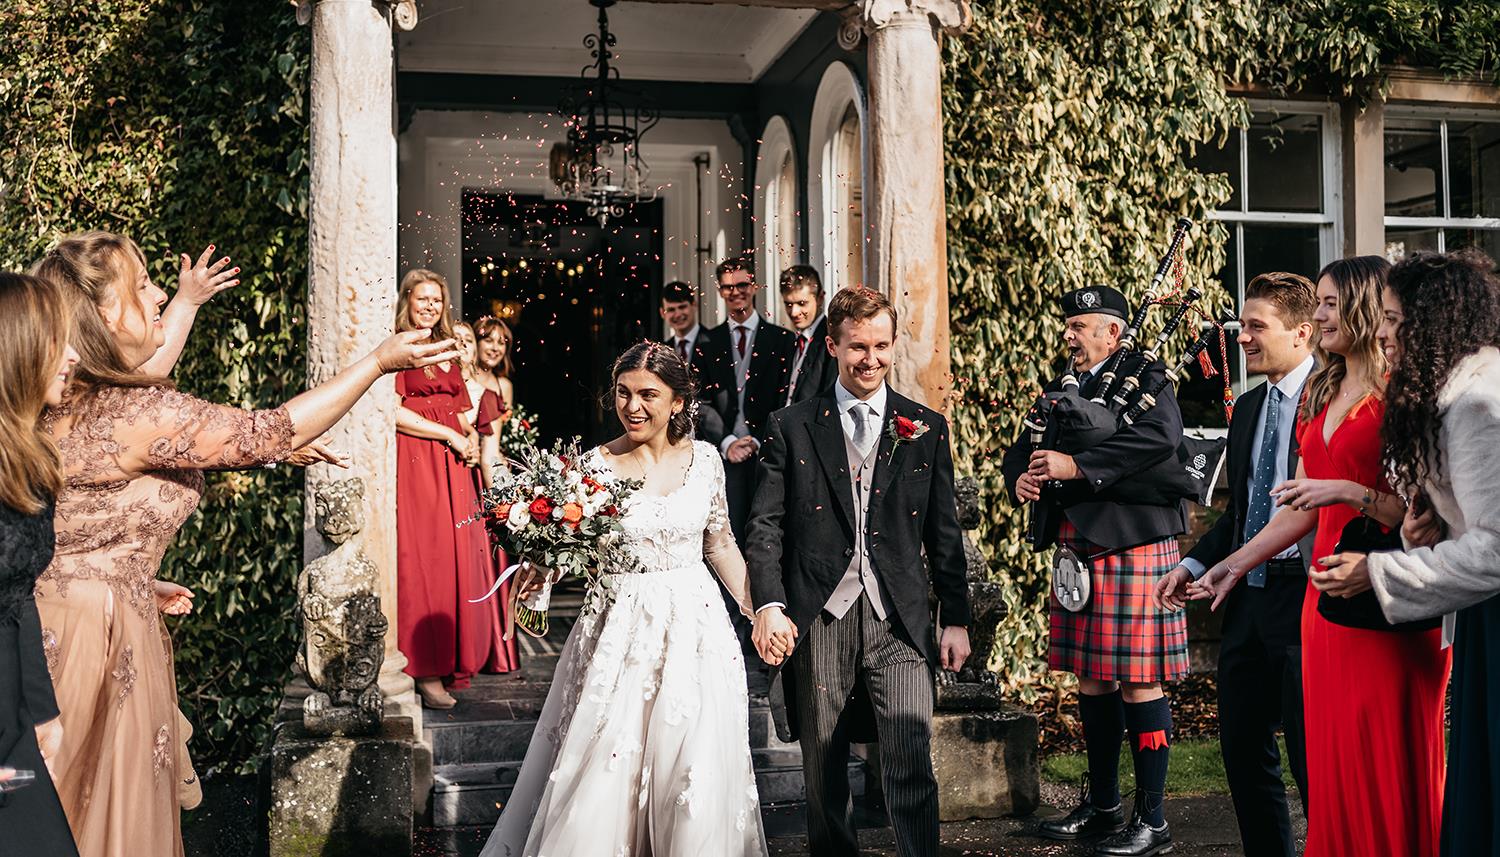 Couple leaving through the entrance. Photo Credit: Mark Keogh Photography